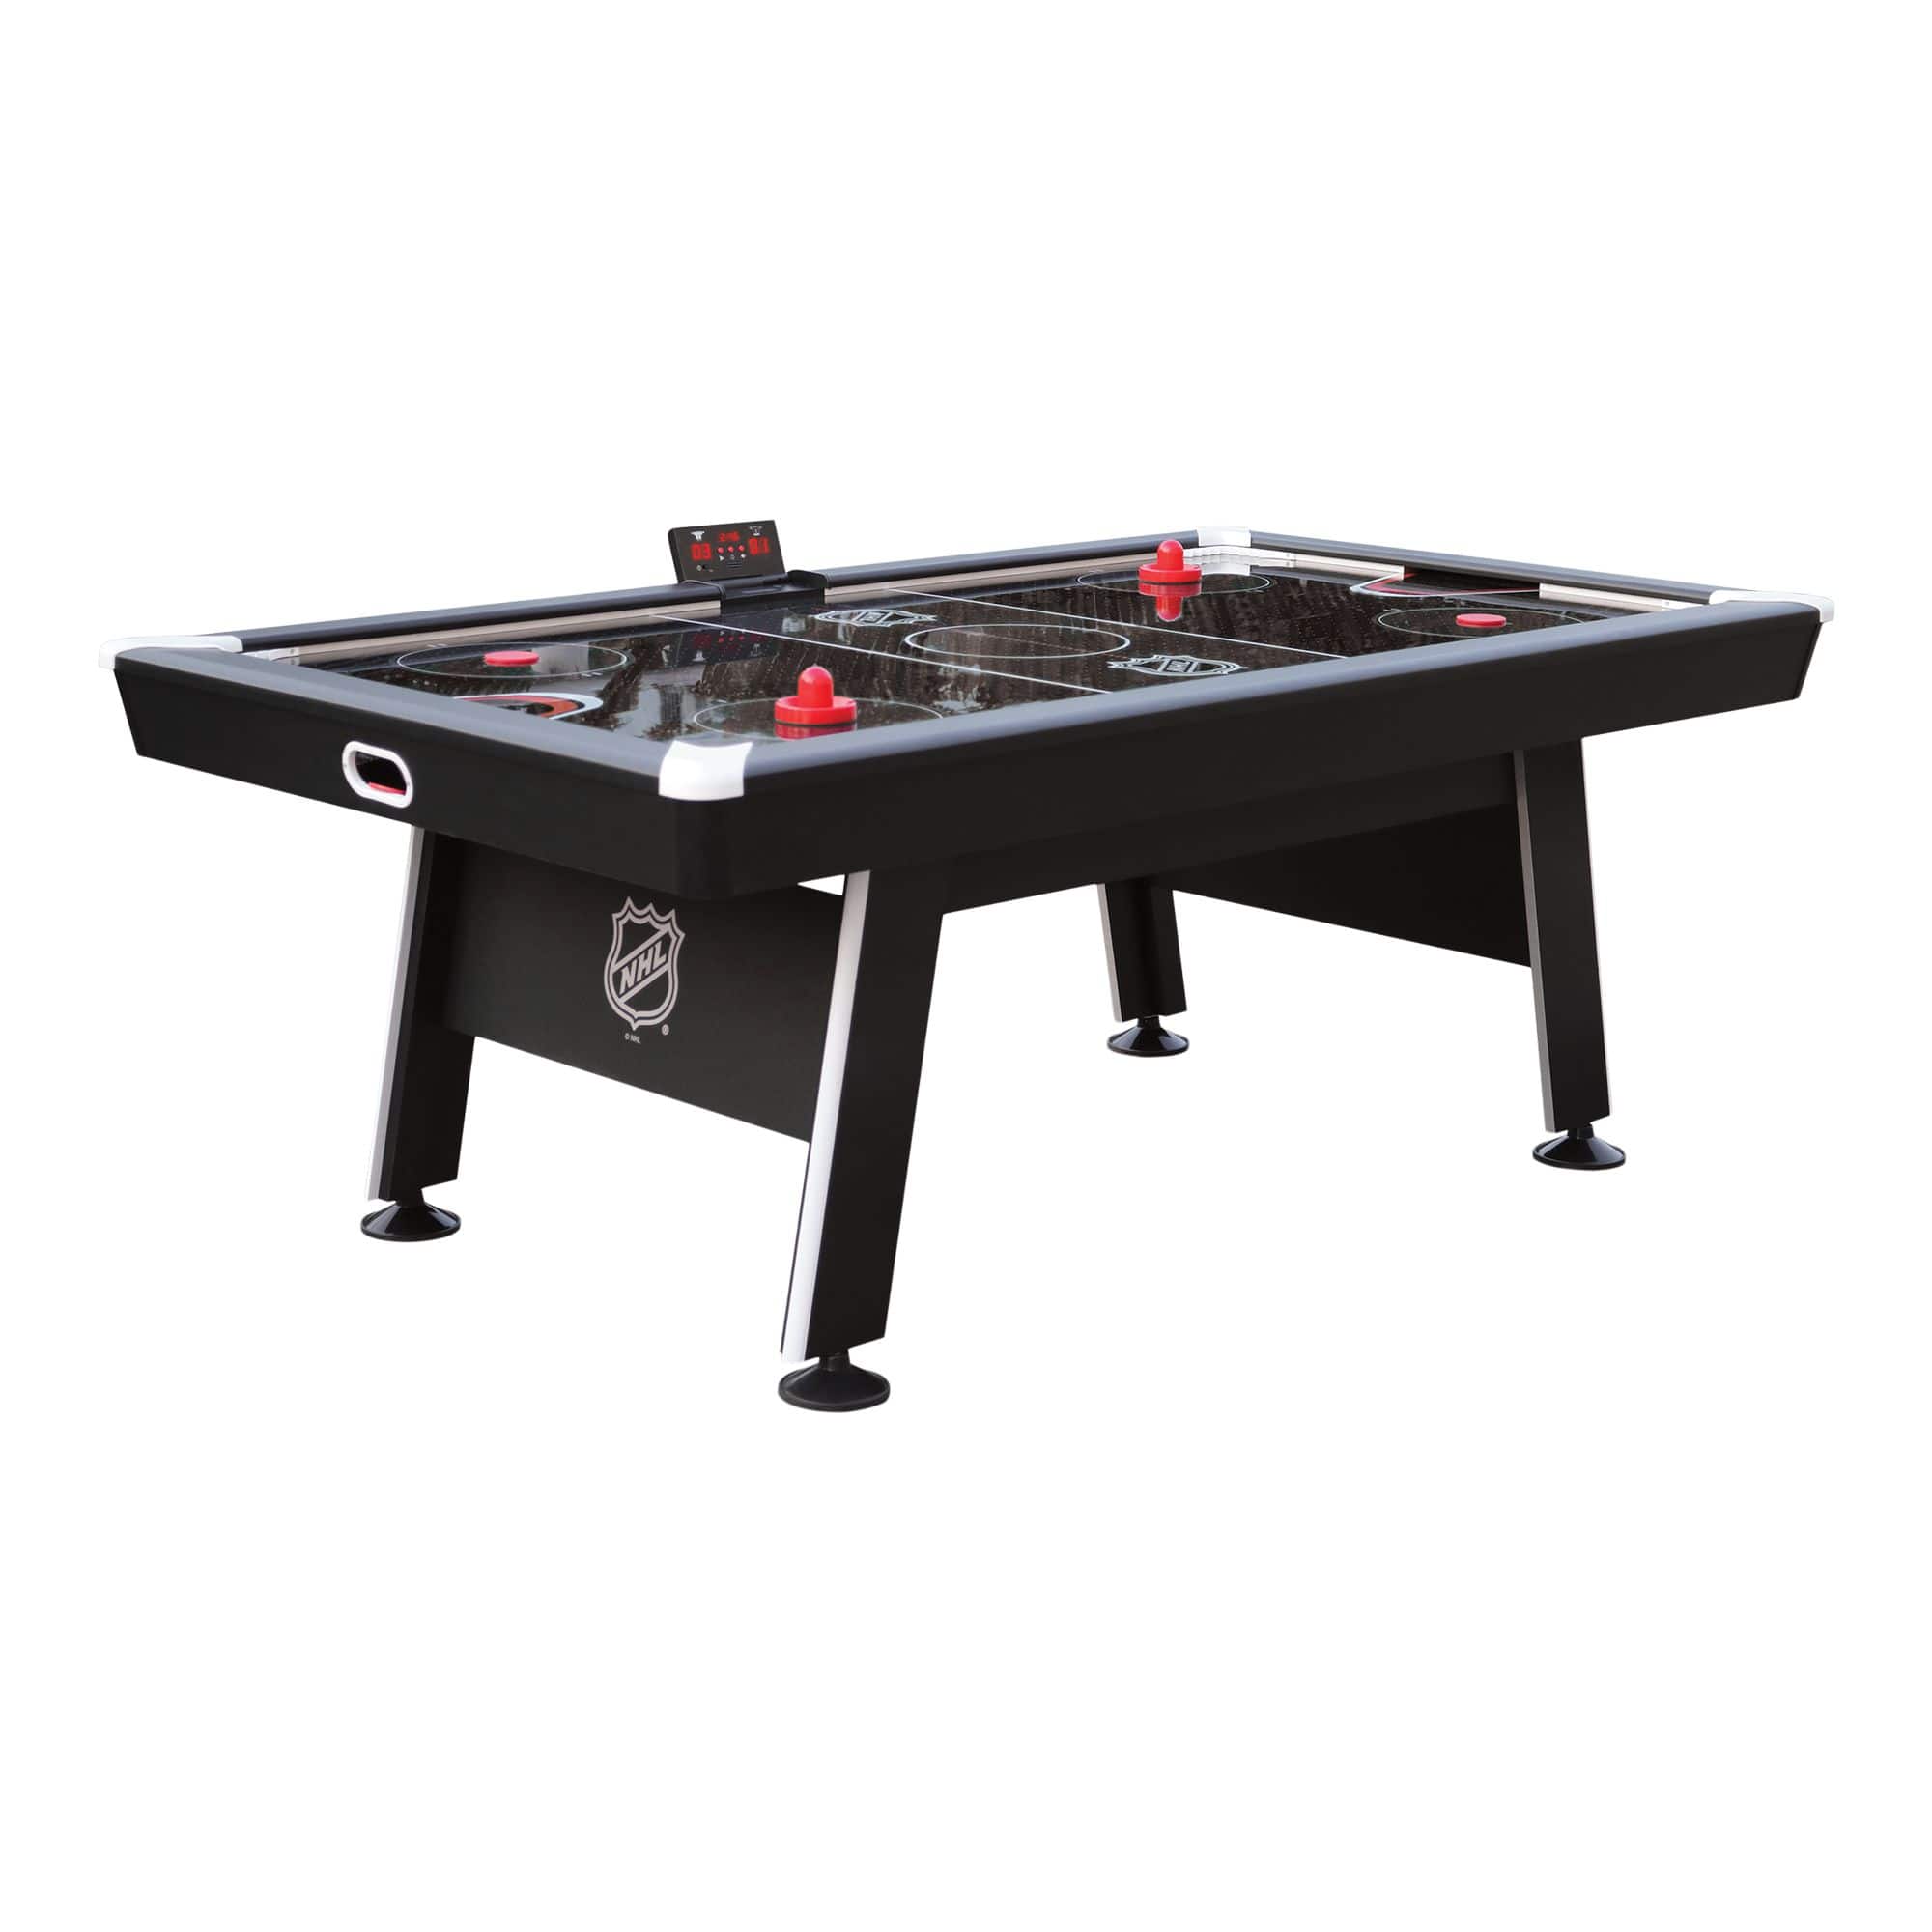 NHL Attacker Hover Air Hockey Game Table w/ Electronic Scoreboard, Pucks and Pushers, 84-in Canadian Tire